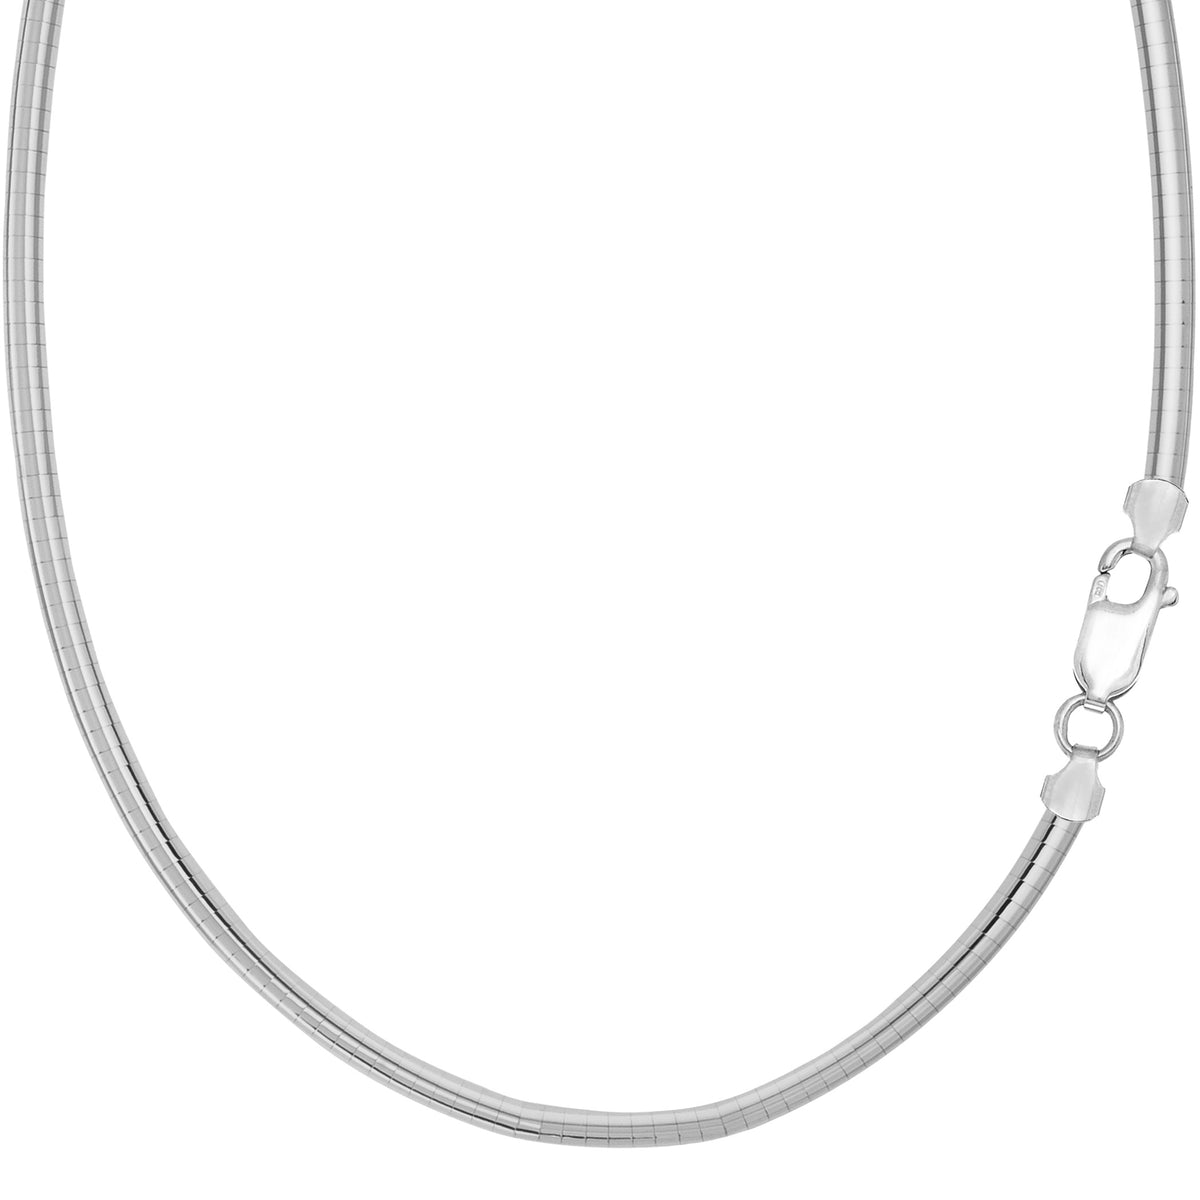 Sterling Silver Rhodium Plated Round Dome Omega Chain Necklace, 4mm, 16" fine designer jewelry for men and women